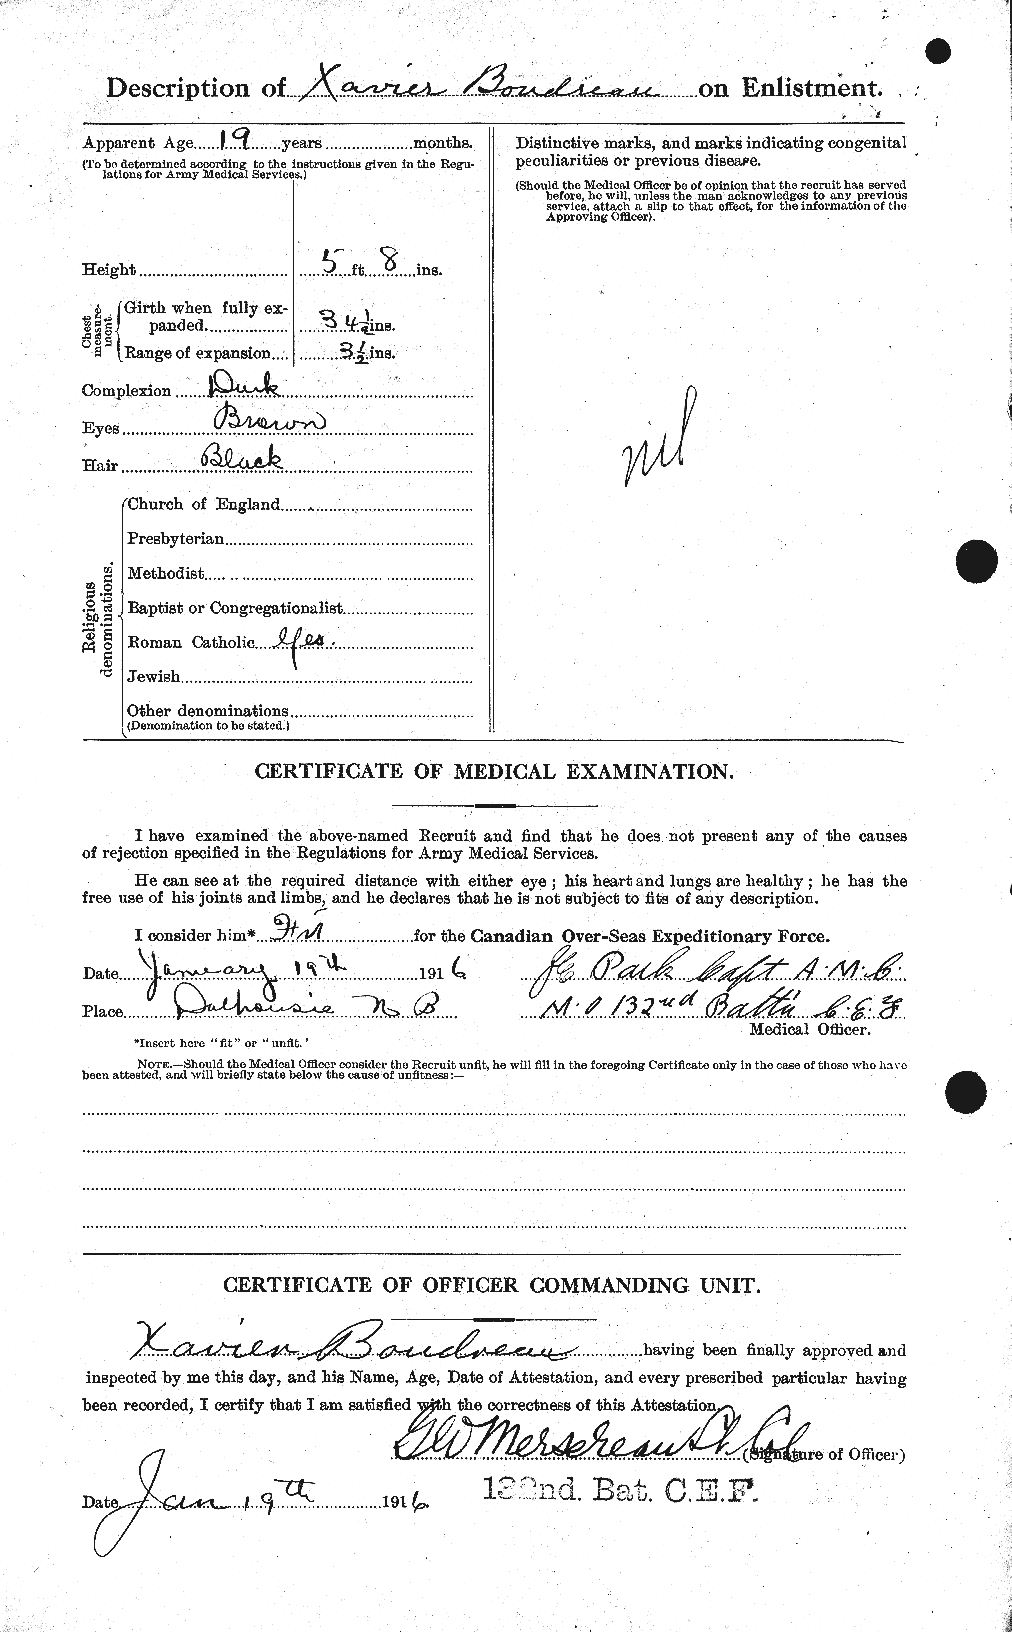 Personnel Records of the First World War - CEF 252579b